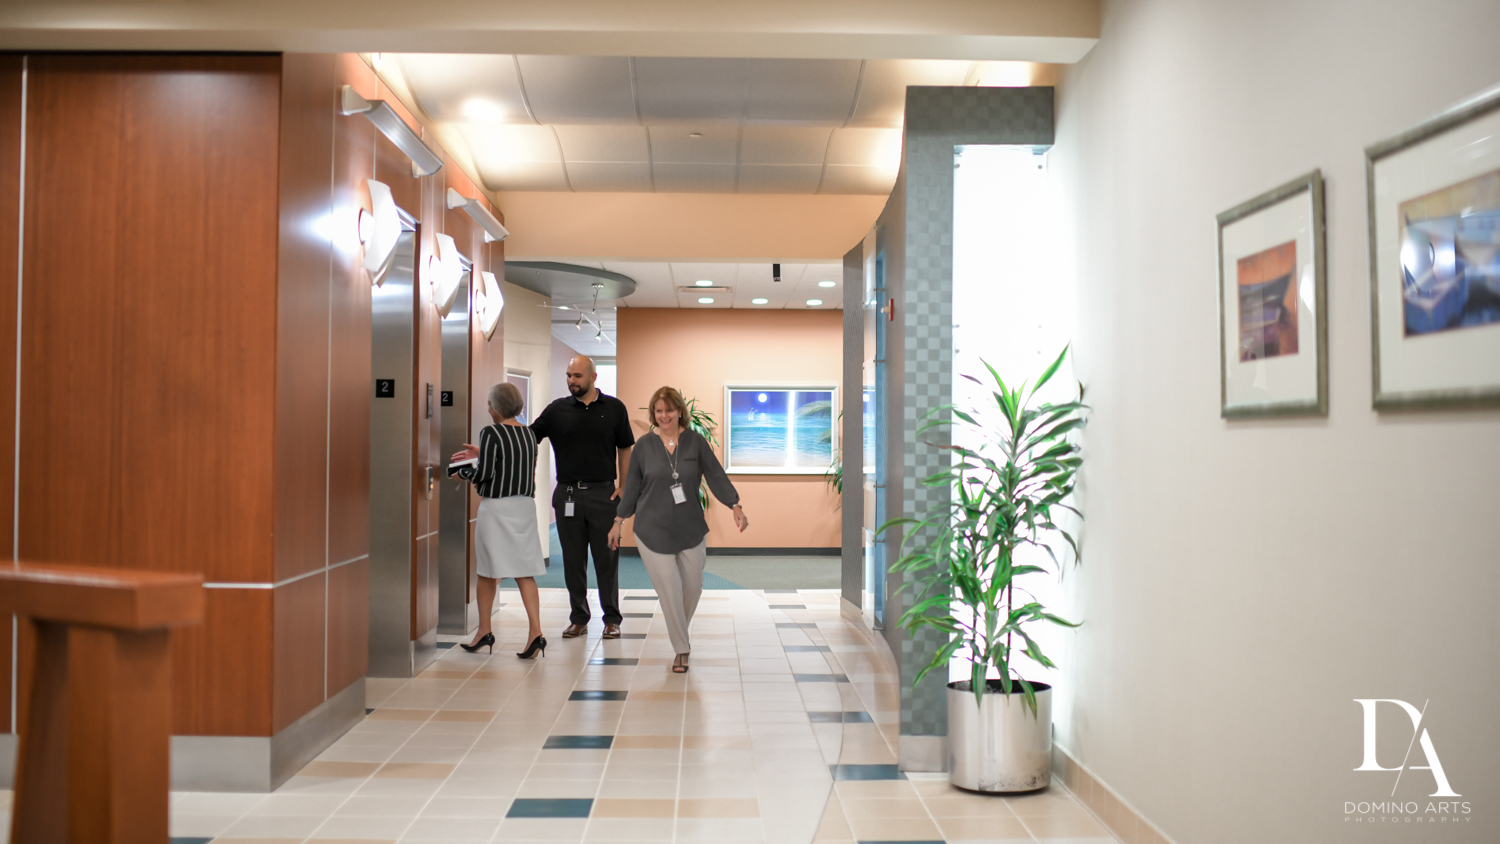 hallway at Corporate Photography Power Financial Credit Union in Pembroke Pines